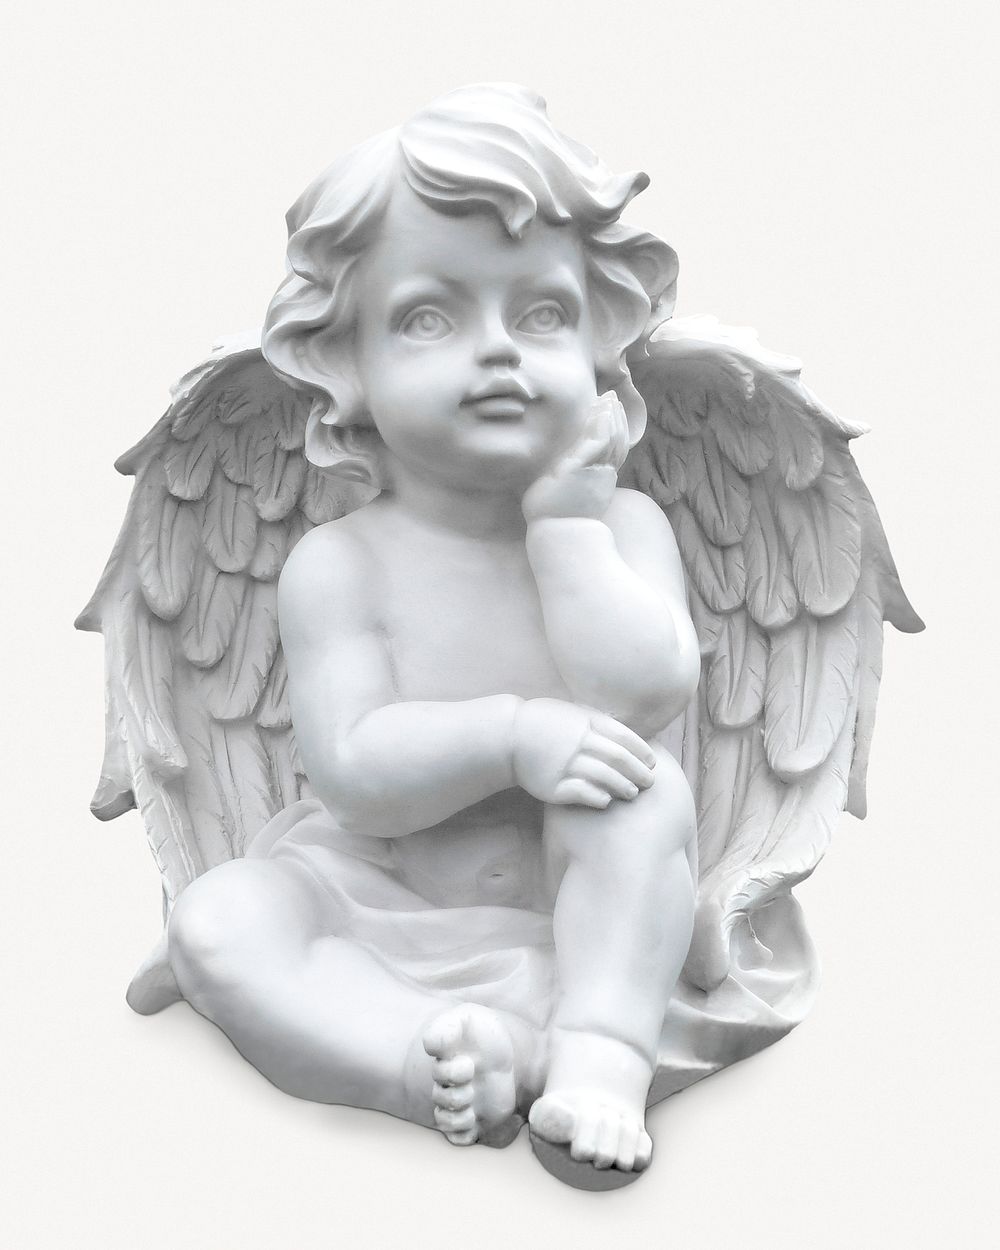 Baby angel statue, isolated sculpture image psd